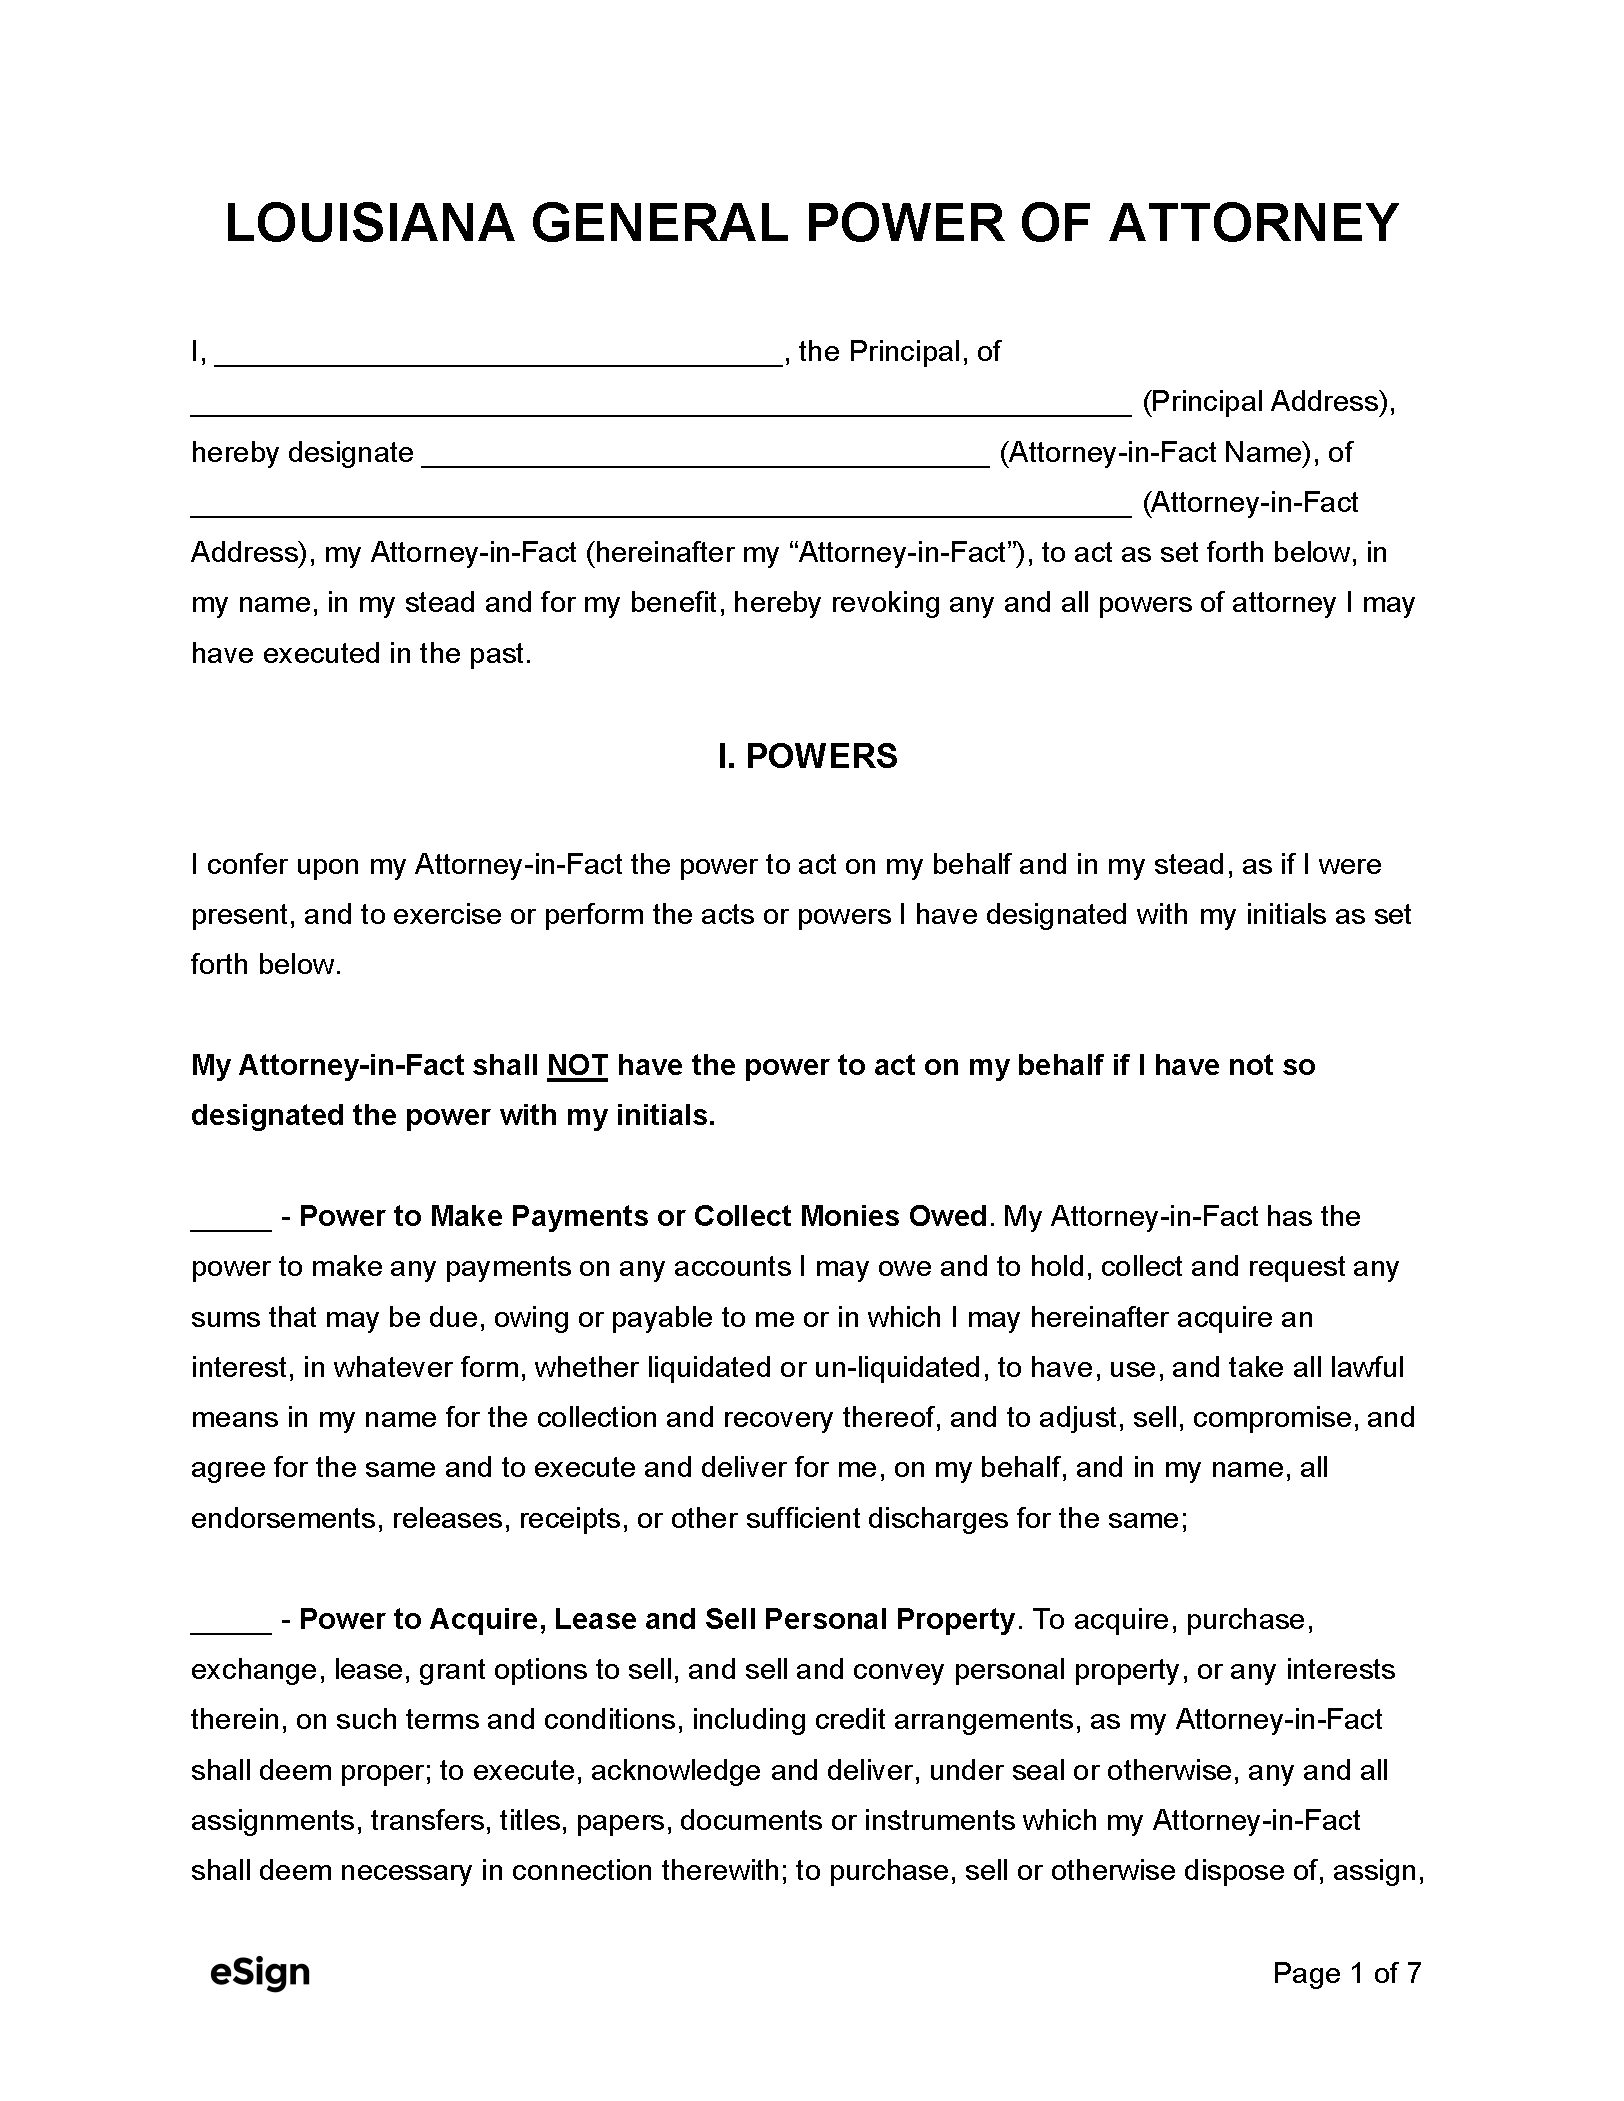 free-louisiana-general-power-of-attorney-form-pdf-word